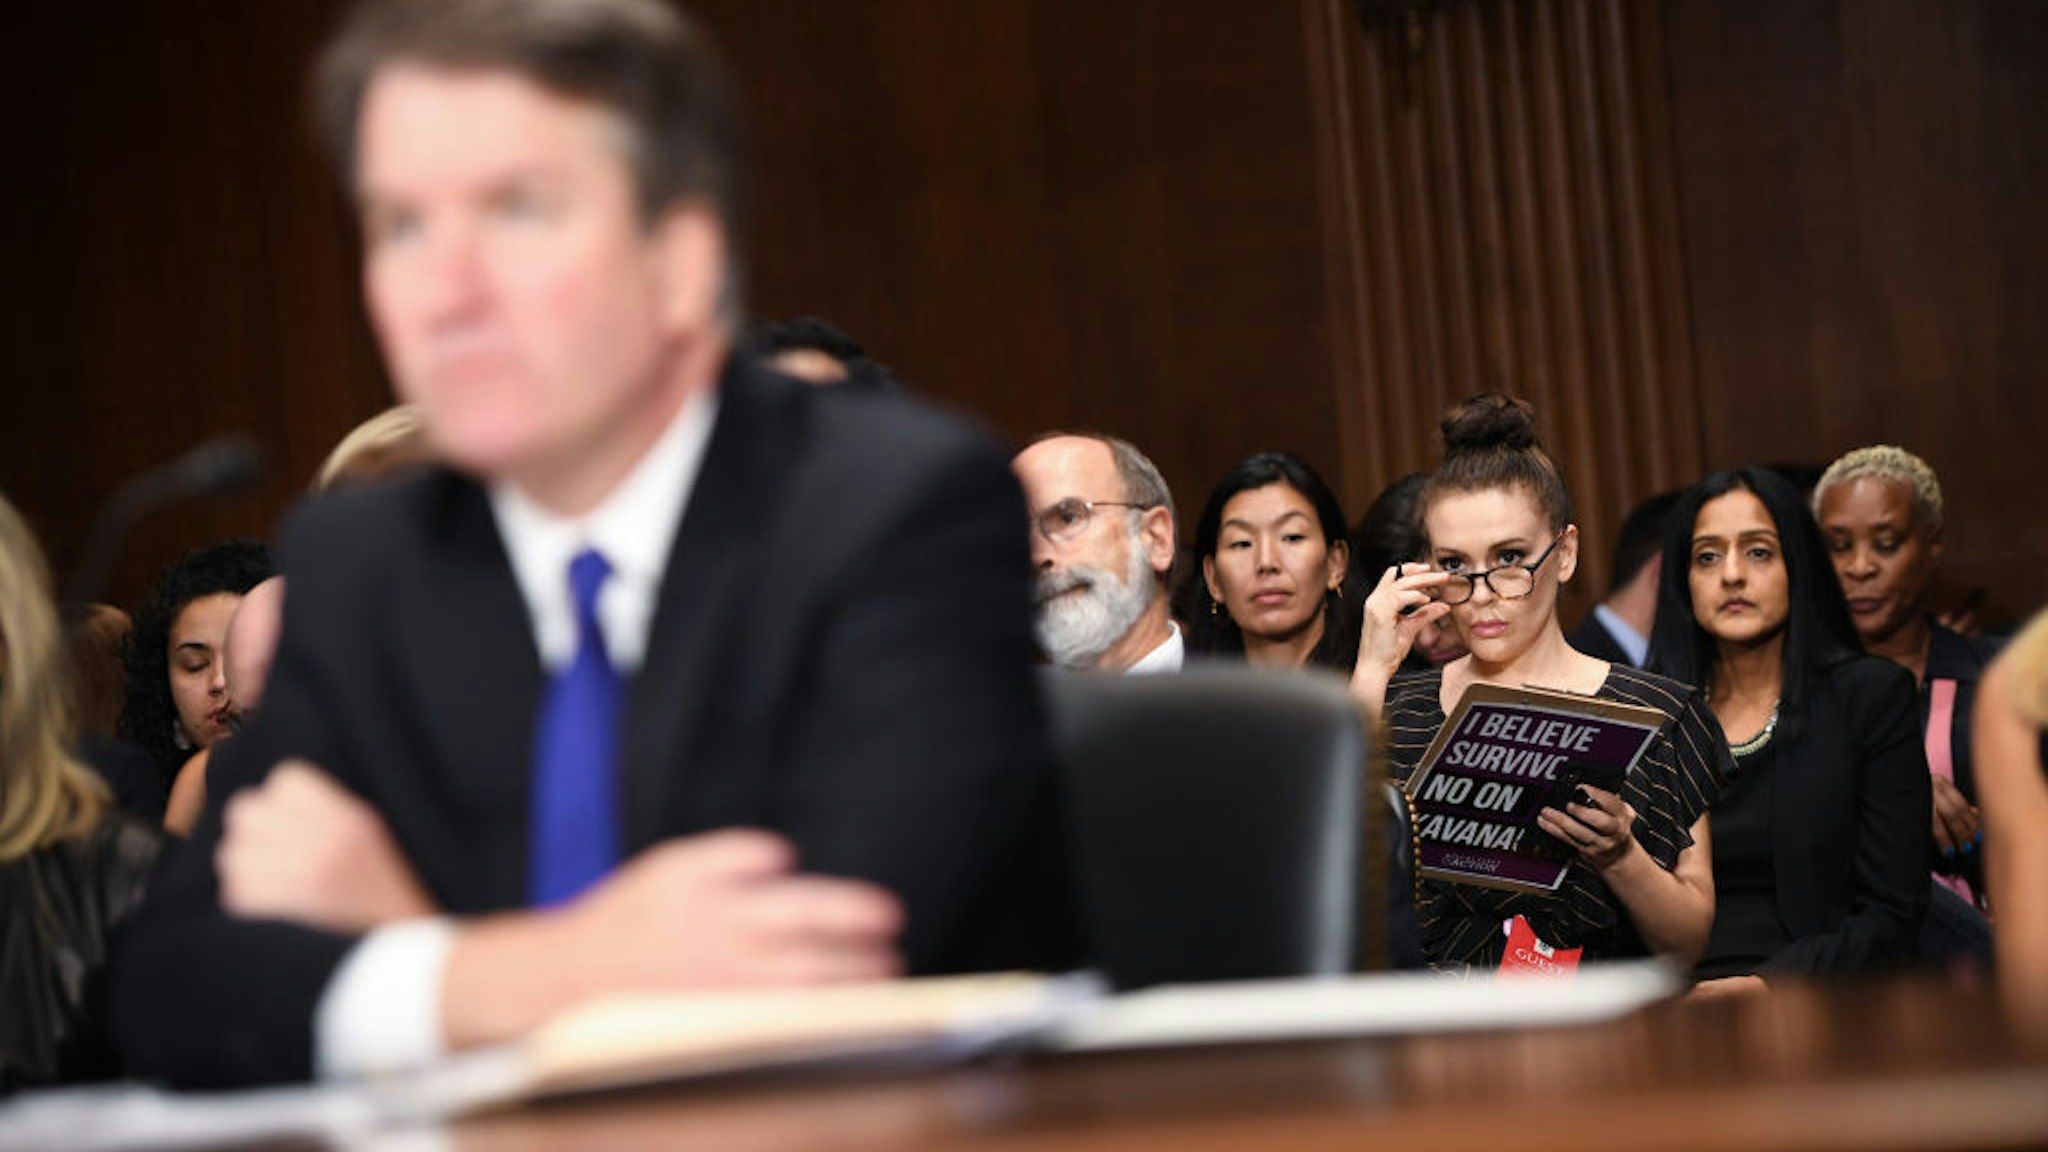 Actress and activist Alyssa Milano (R) listens to Supreme Court nominee Brett Kavanaugh as he testifies before the U.S. Senate Judiciary Committee on Capitol Hill on September 27, 2018 in Washington, DC.